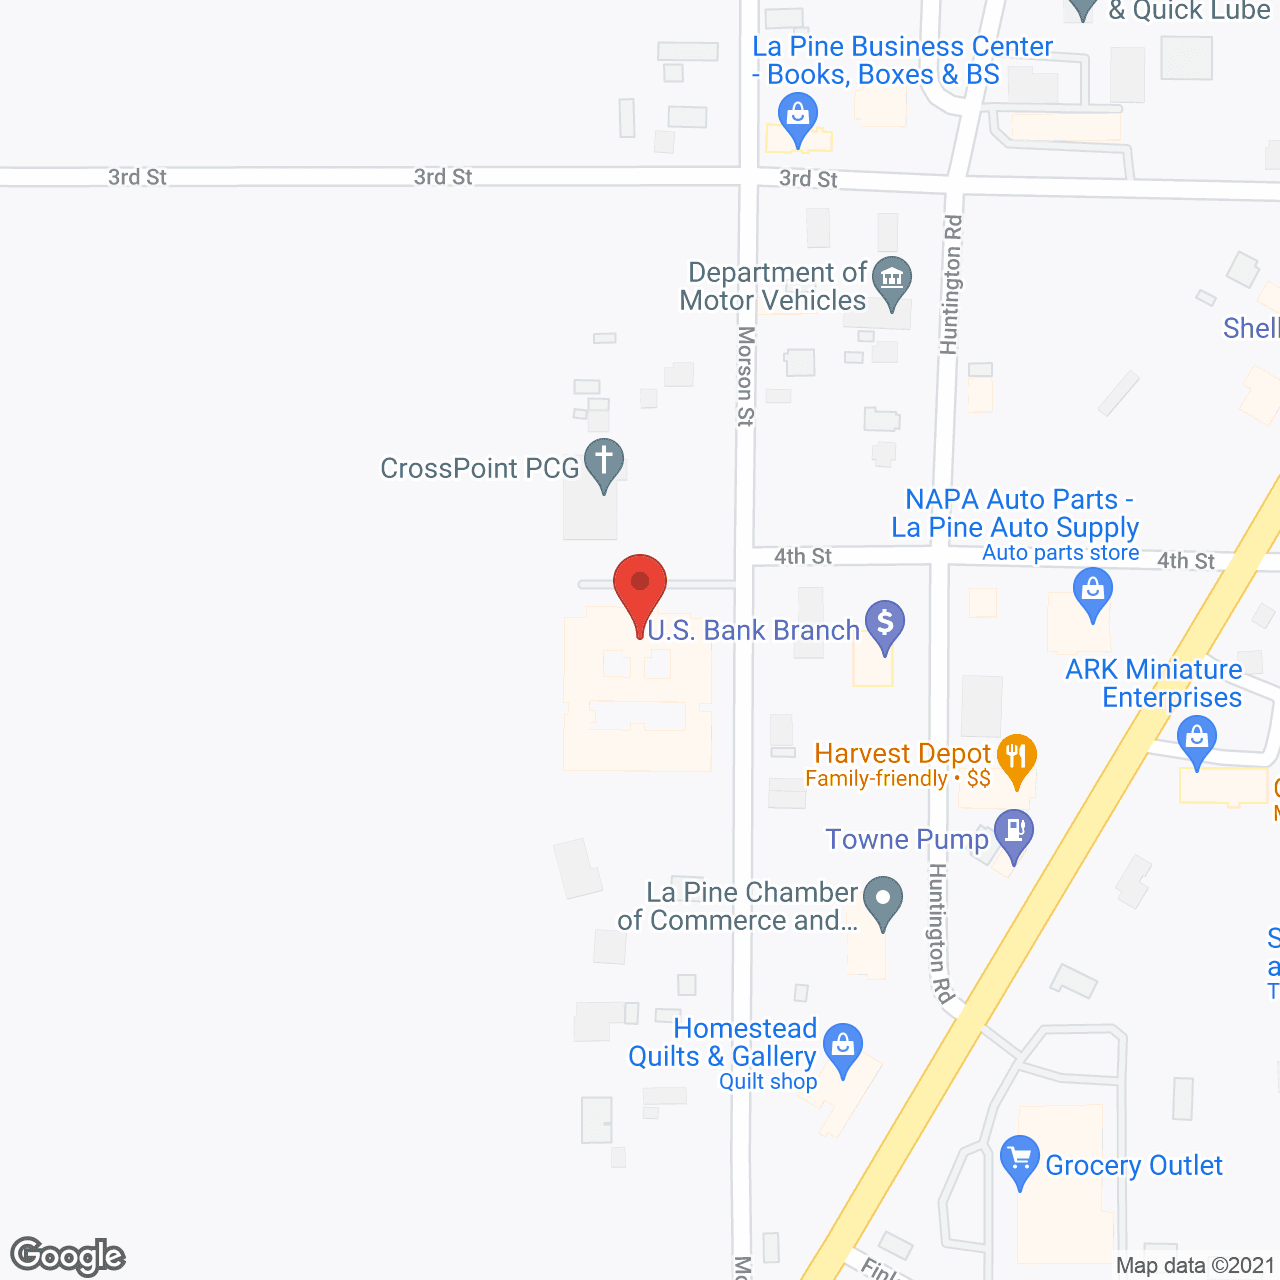 Prairie House Assisted Living and Memory Care in google map